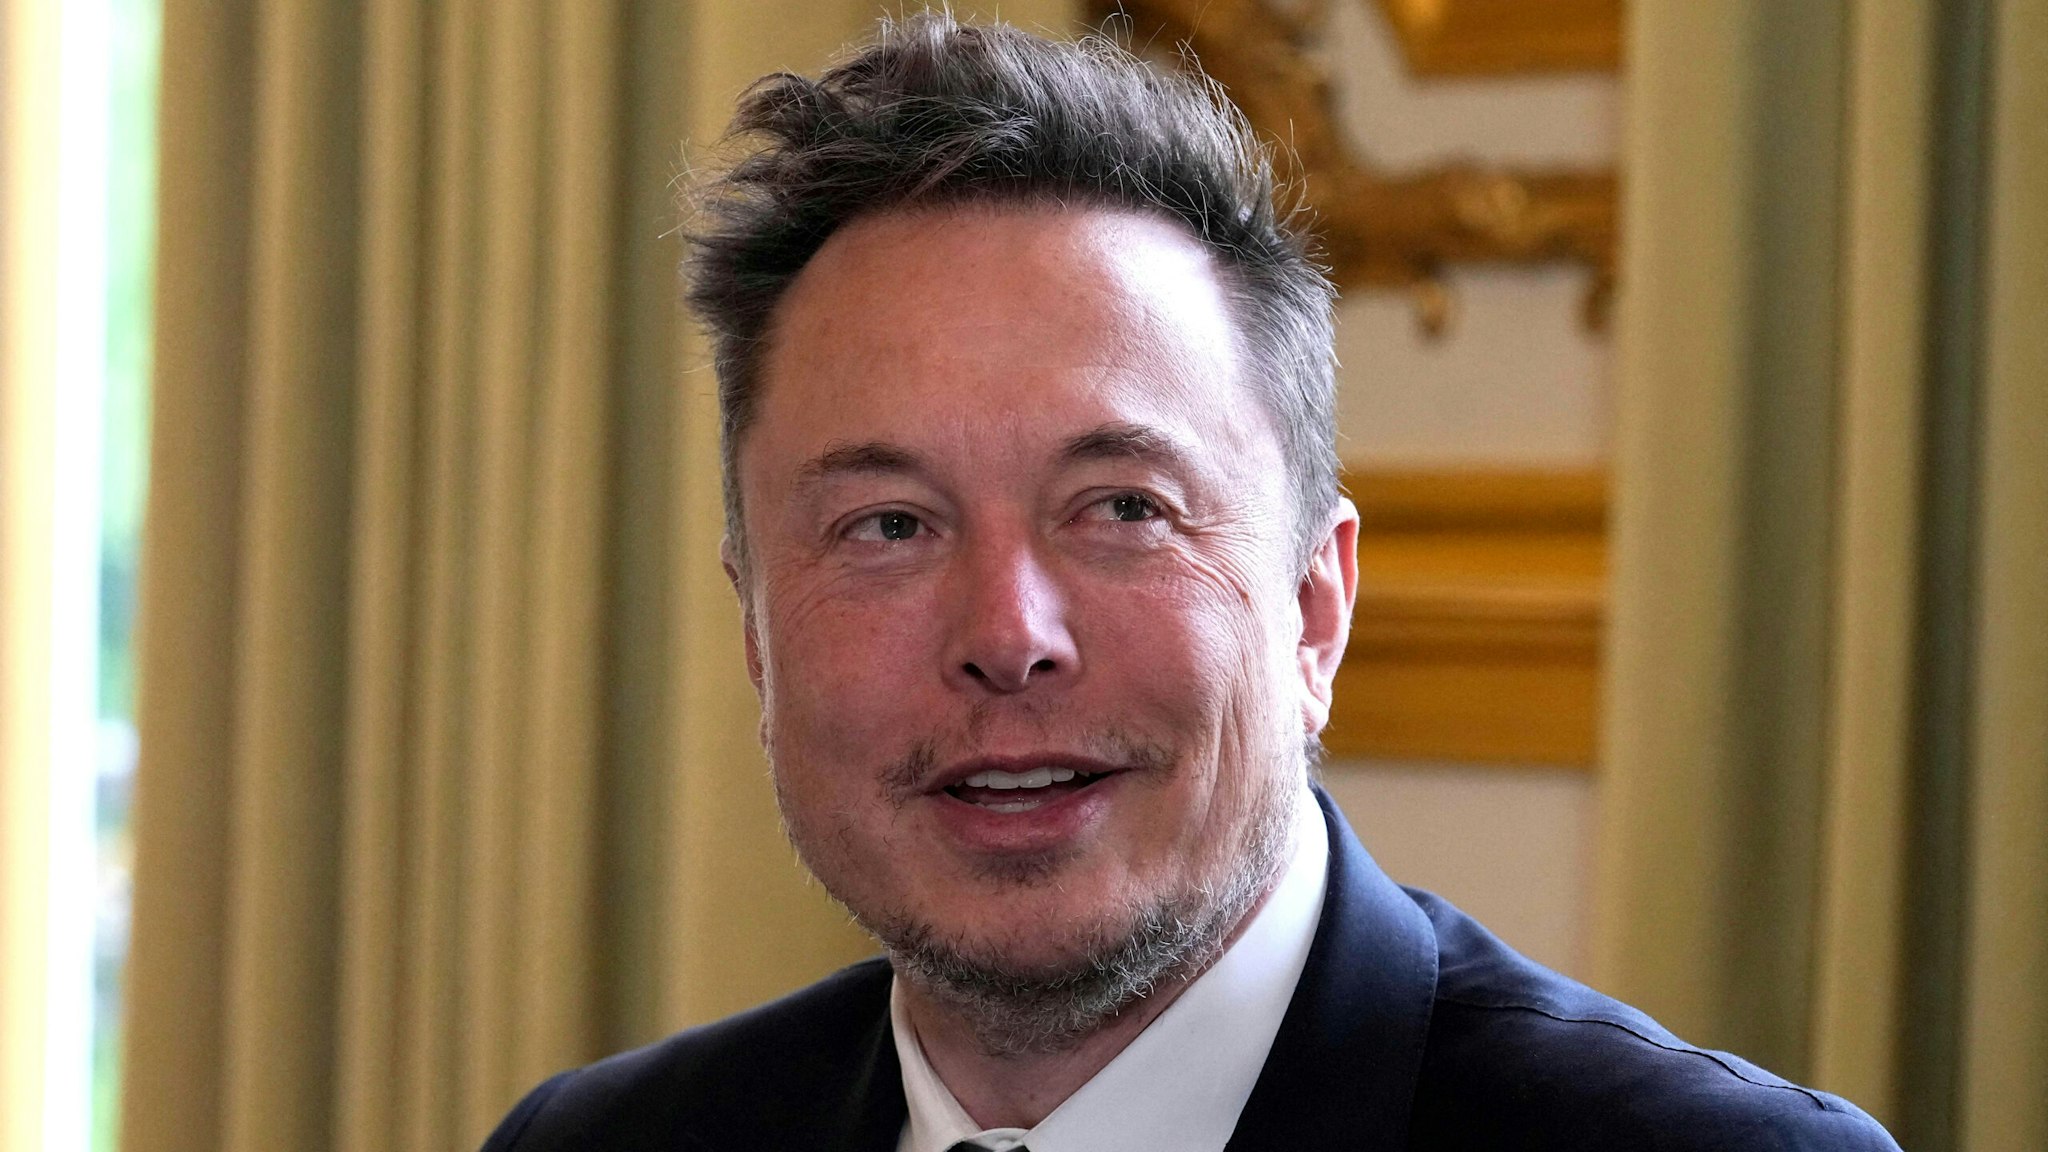 SpaceX, Twitter and electric car maker Tesla CEO Elon Musk meets with France's President at the Elysee presidential palace in Paris on May 15, 2023.